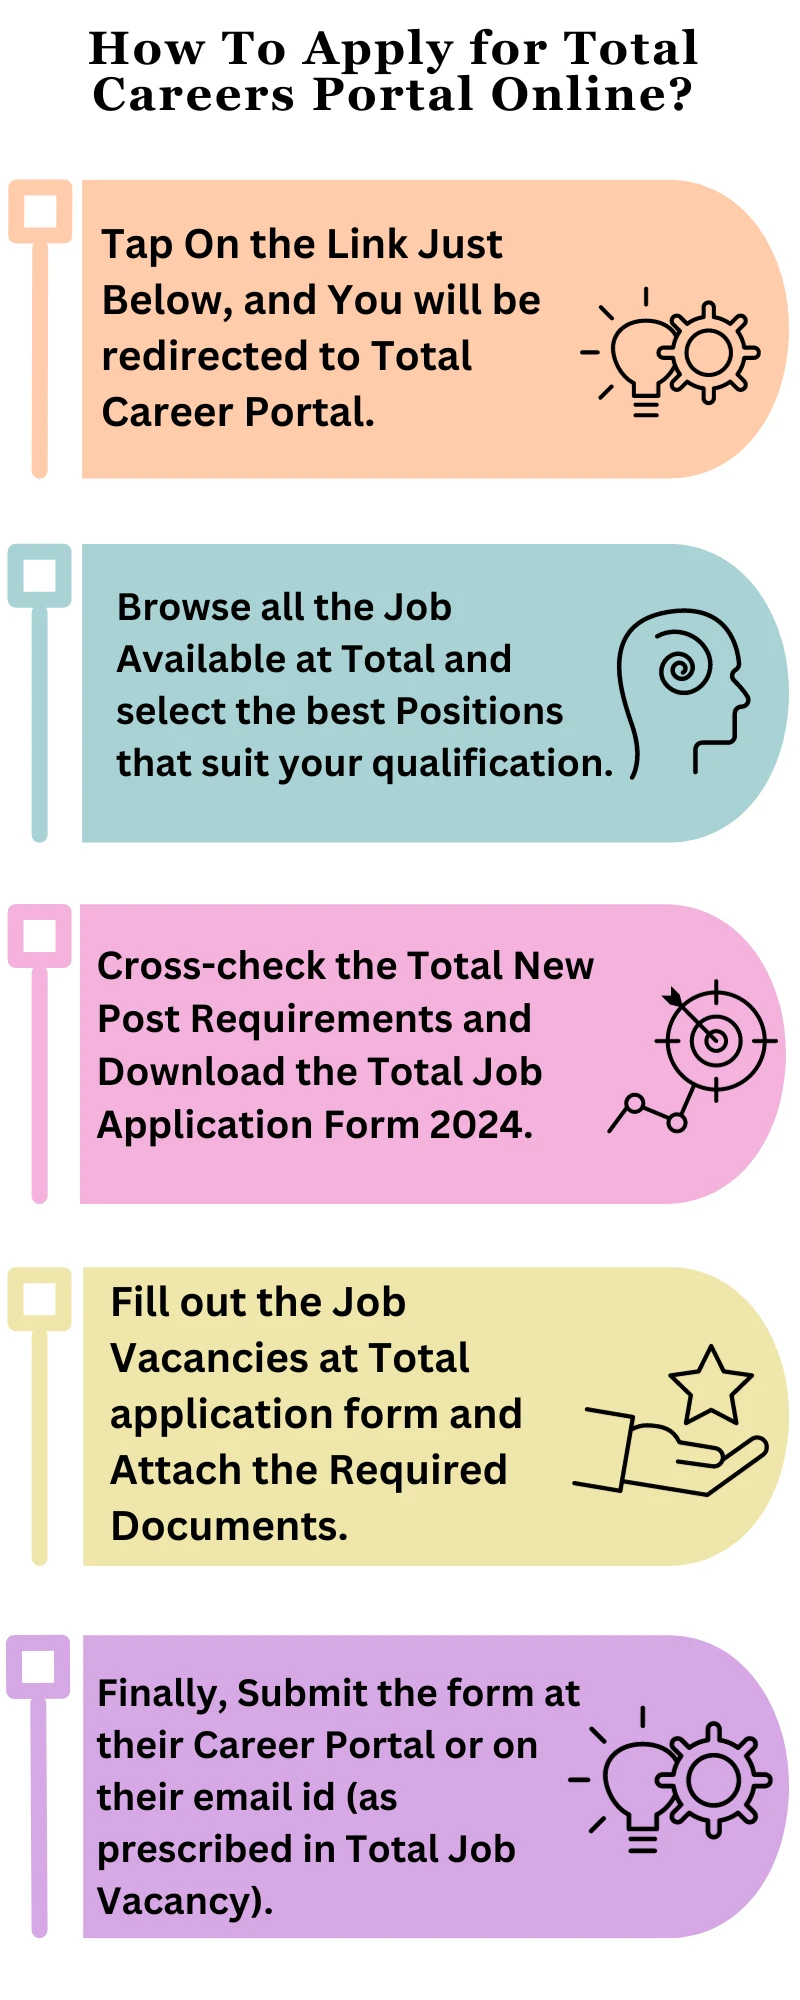 How To Apply for Total Careers Portal Online?